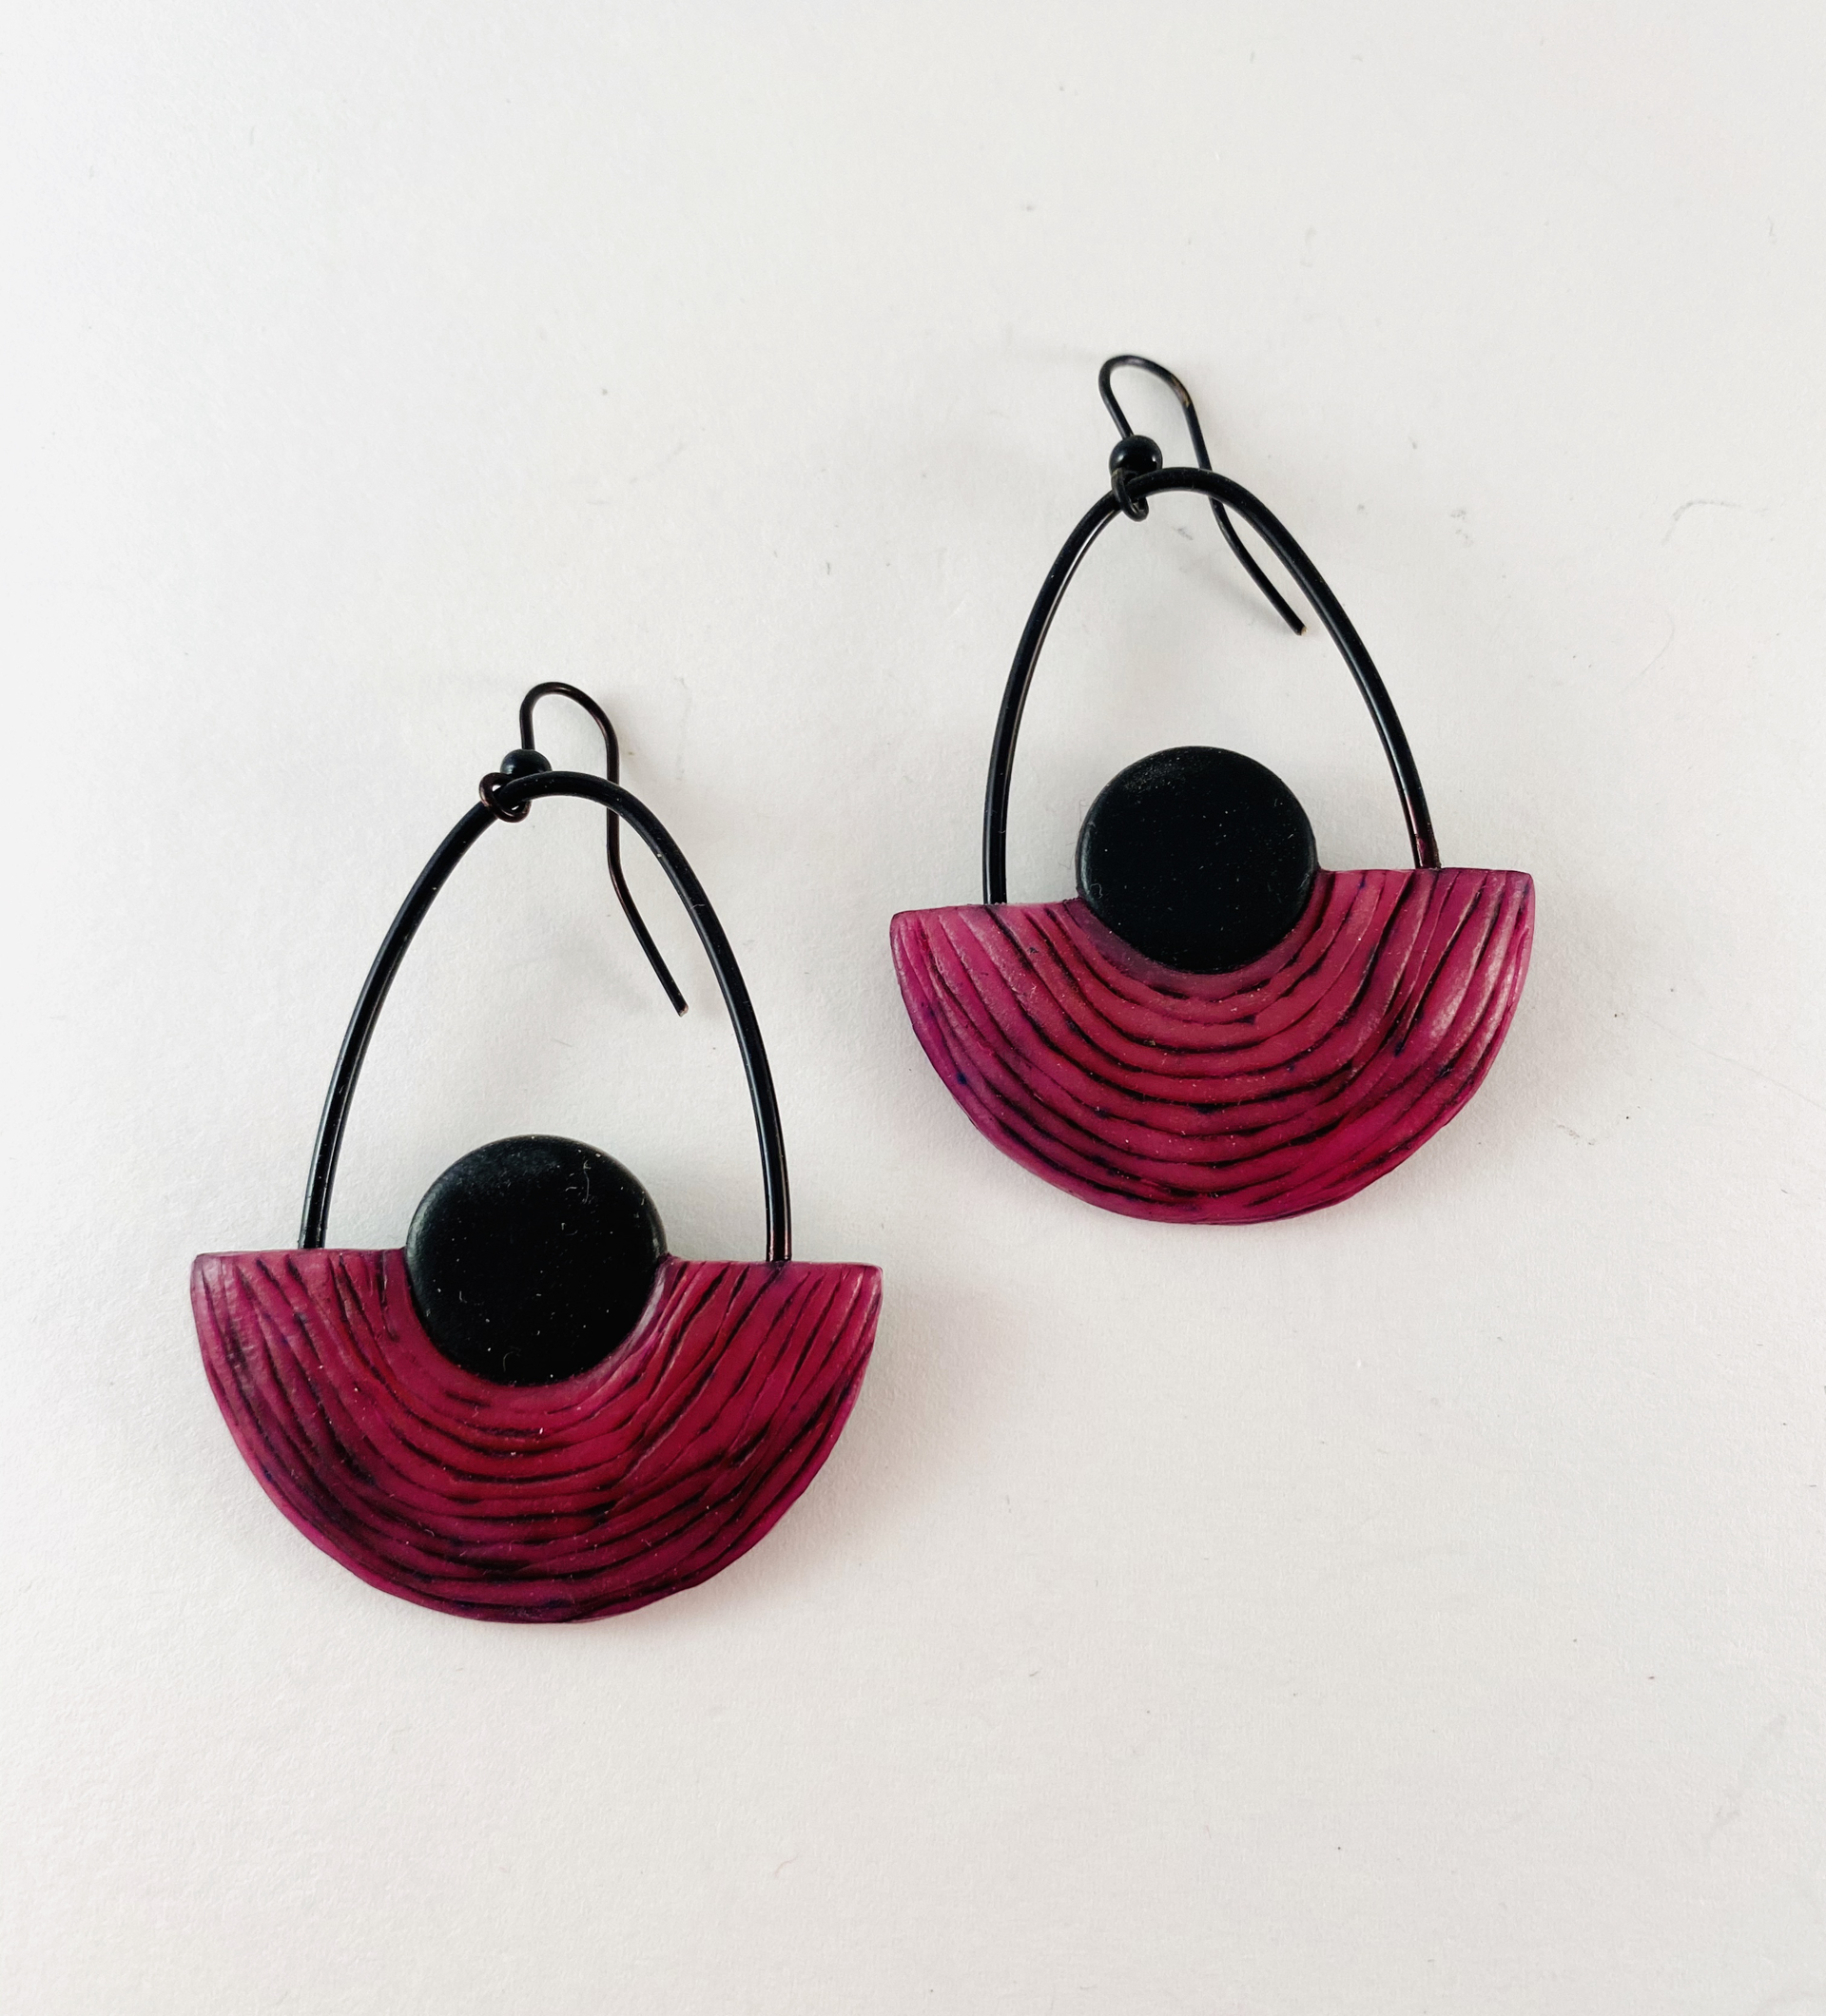 Black and Pink Earrings 2h by Nancy Roth